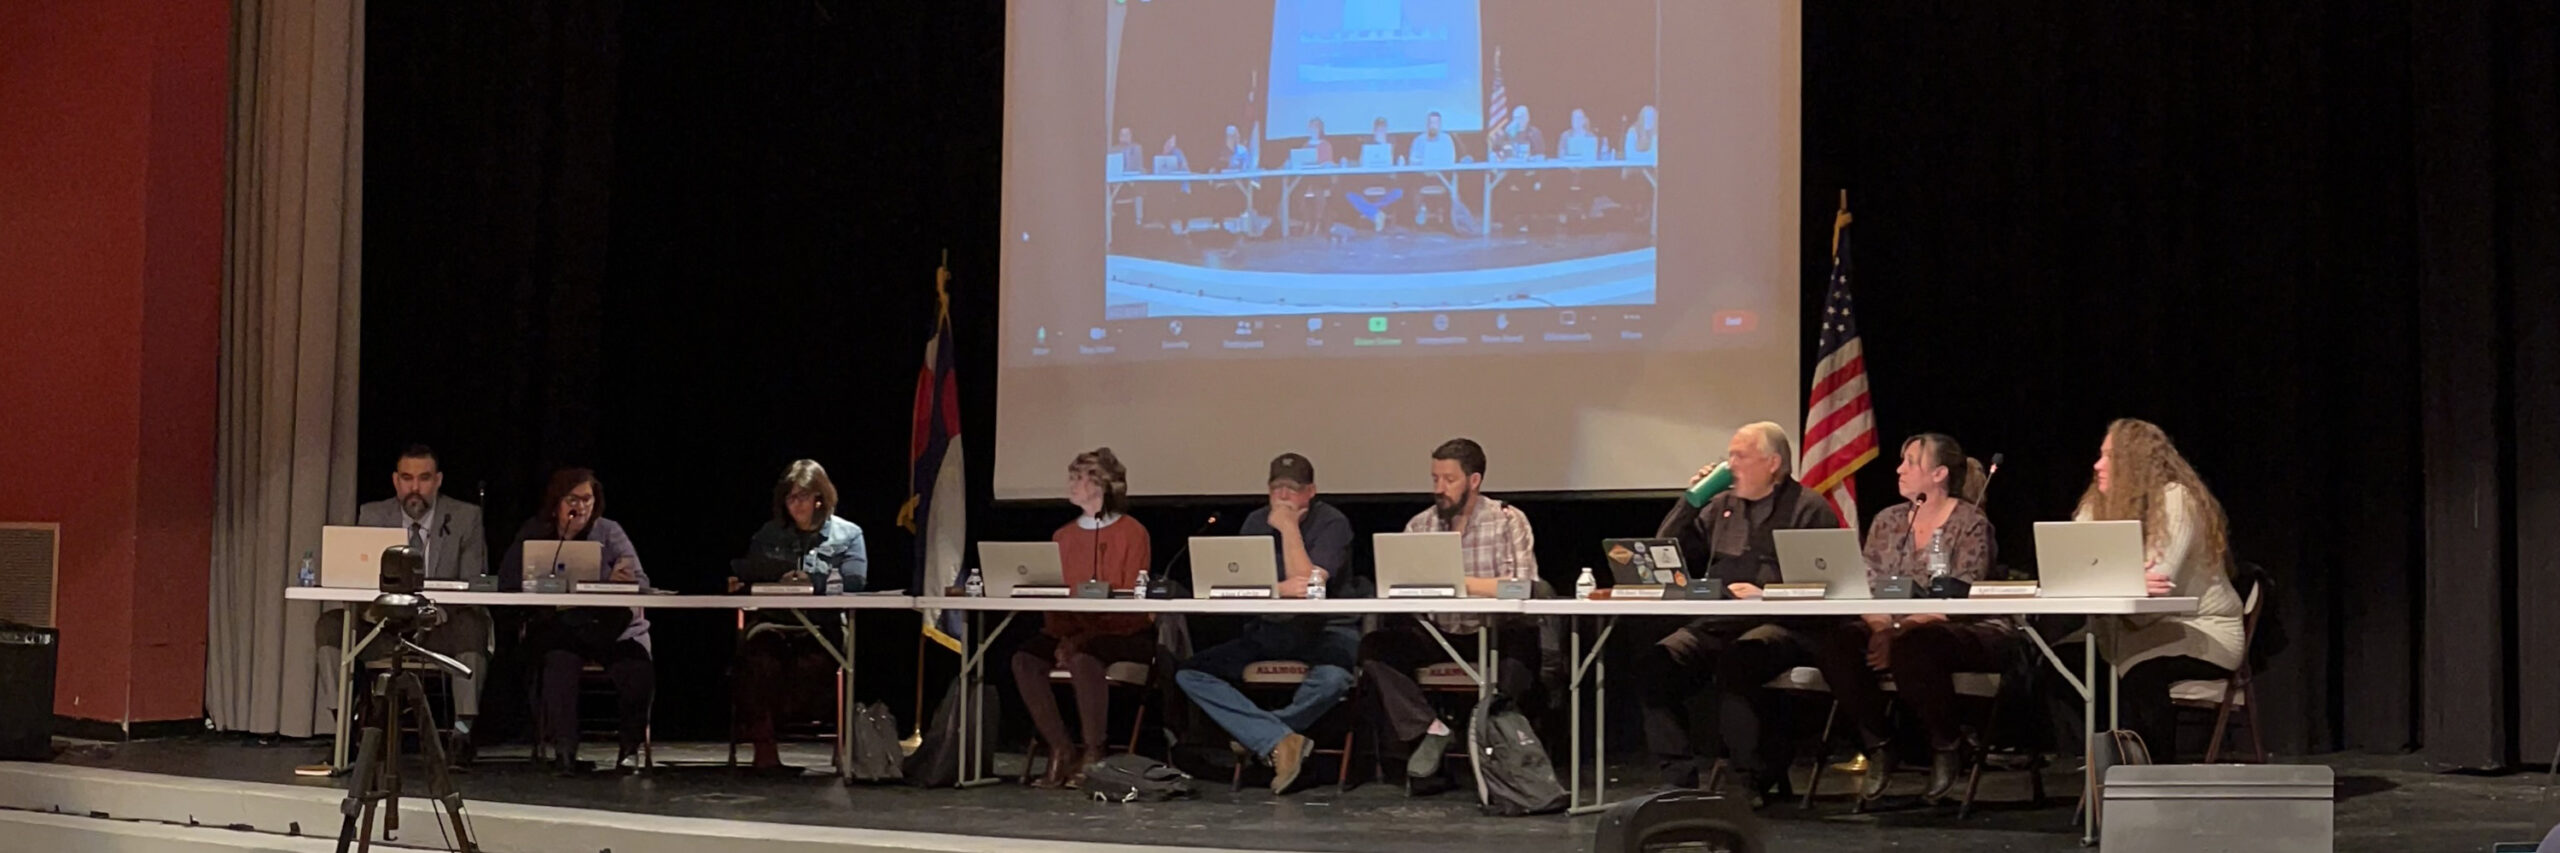 School Board members sitting at a long table on a stage with a screen behind them.